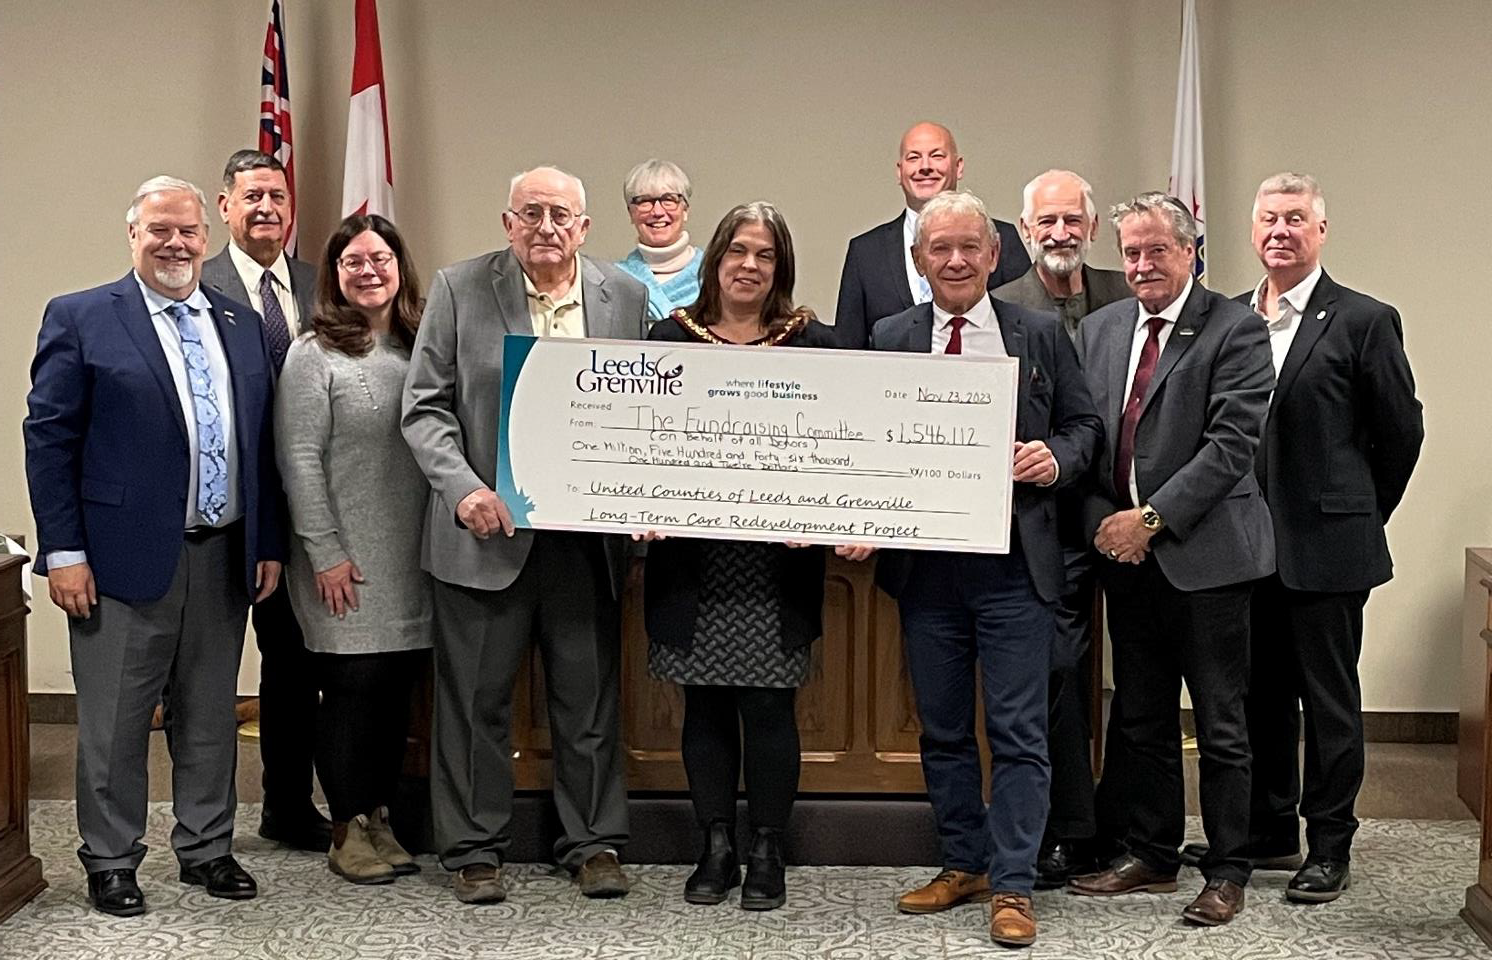 Maple View Lodge Redevelopment Fundraising Committee presents Counties Council with a cheque in the amount of  $1,546,112, over half of the fundraising campaign goal of $3 million. (Left to right) Brant Burrow, Jeff Shaver, Corinna  Smith-Gatcke, Herb Scott, Robin Jones, Warden Nancy Peckford, Tory Deschamps, Doug Struthers, Arie Hoogenboom,  Roger Haley, Michael Cameron